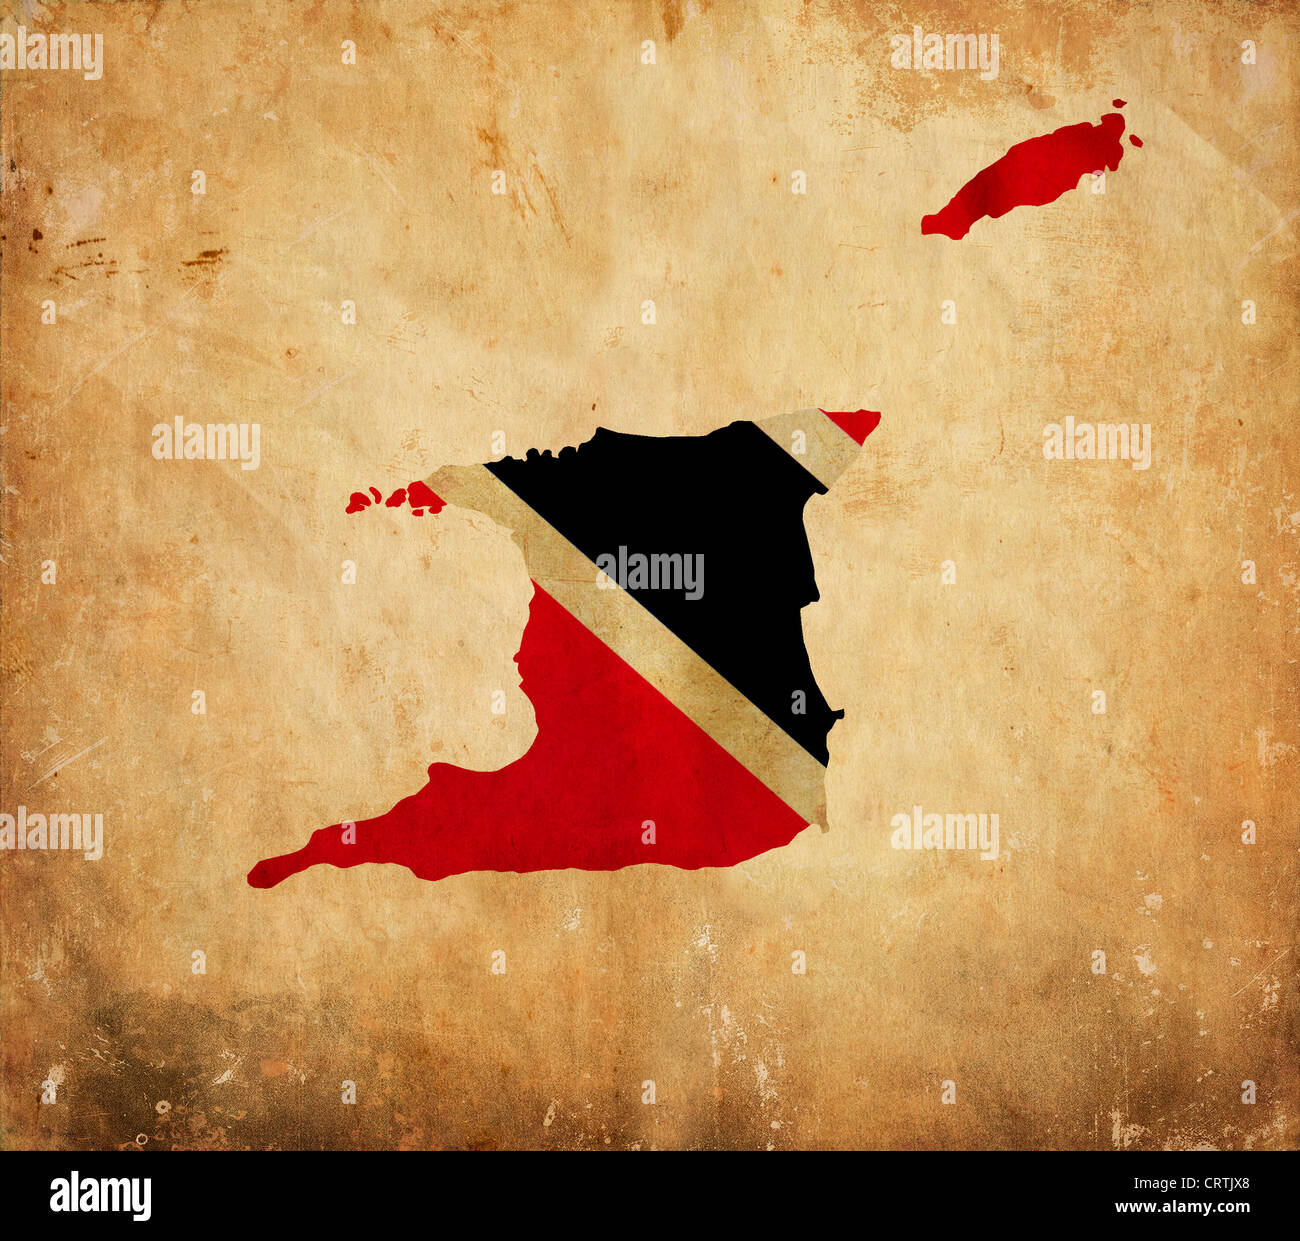 Vintage map of Trinidad and Tobago on grunge paper Stock Photo